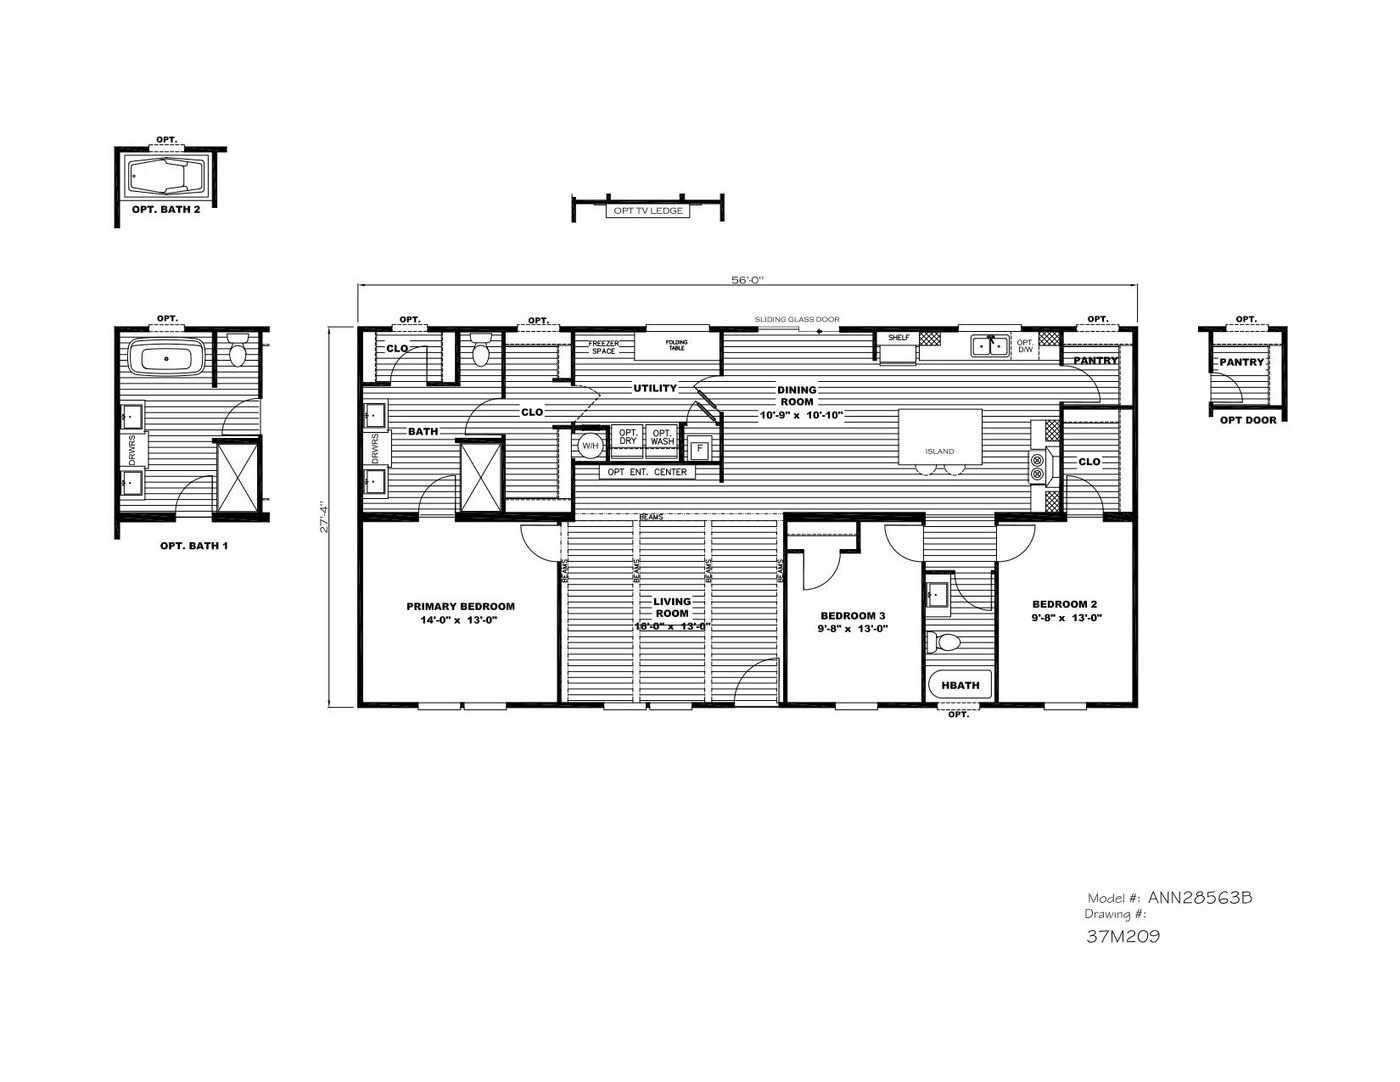 The ANNIVERSARY 56 Floor Plan. This Manufactured Mobile Home features 3 bedrooms and 2 baths.